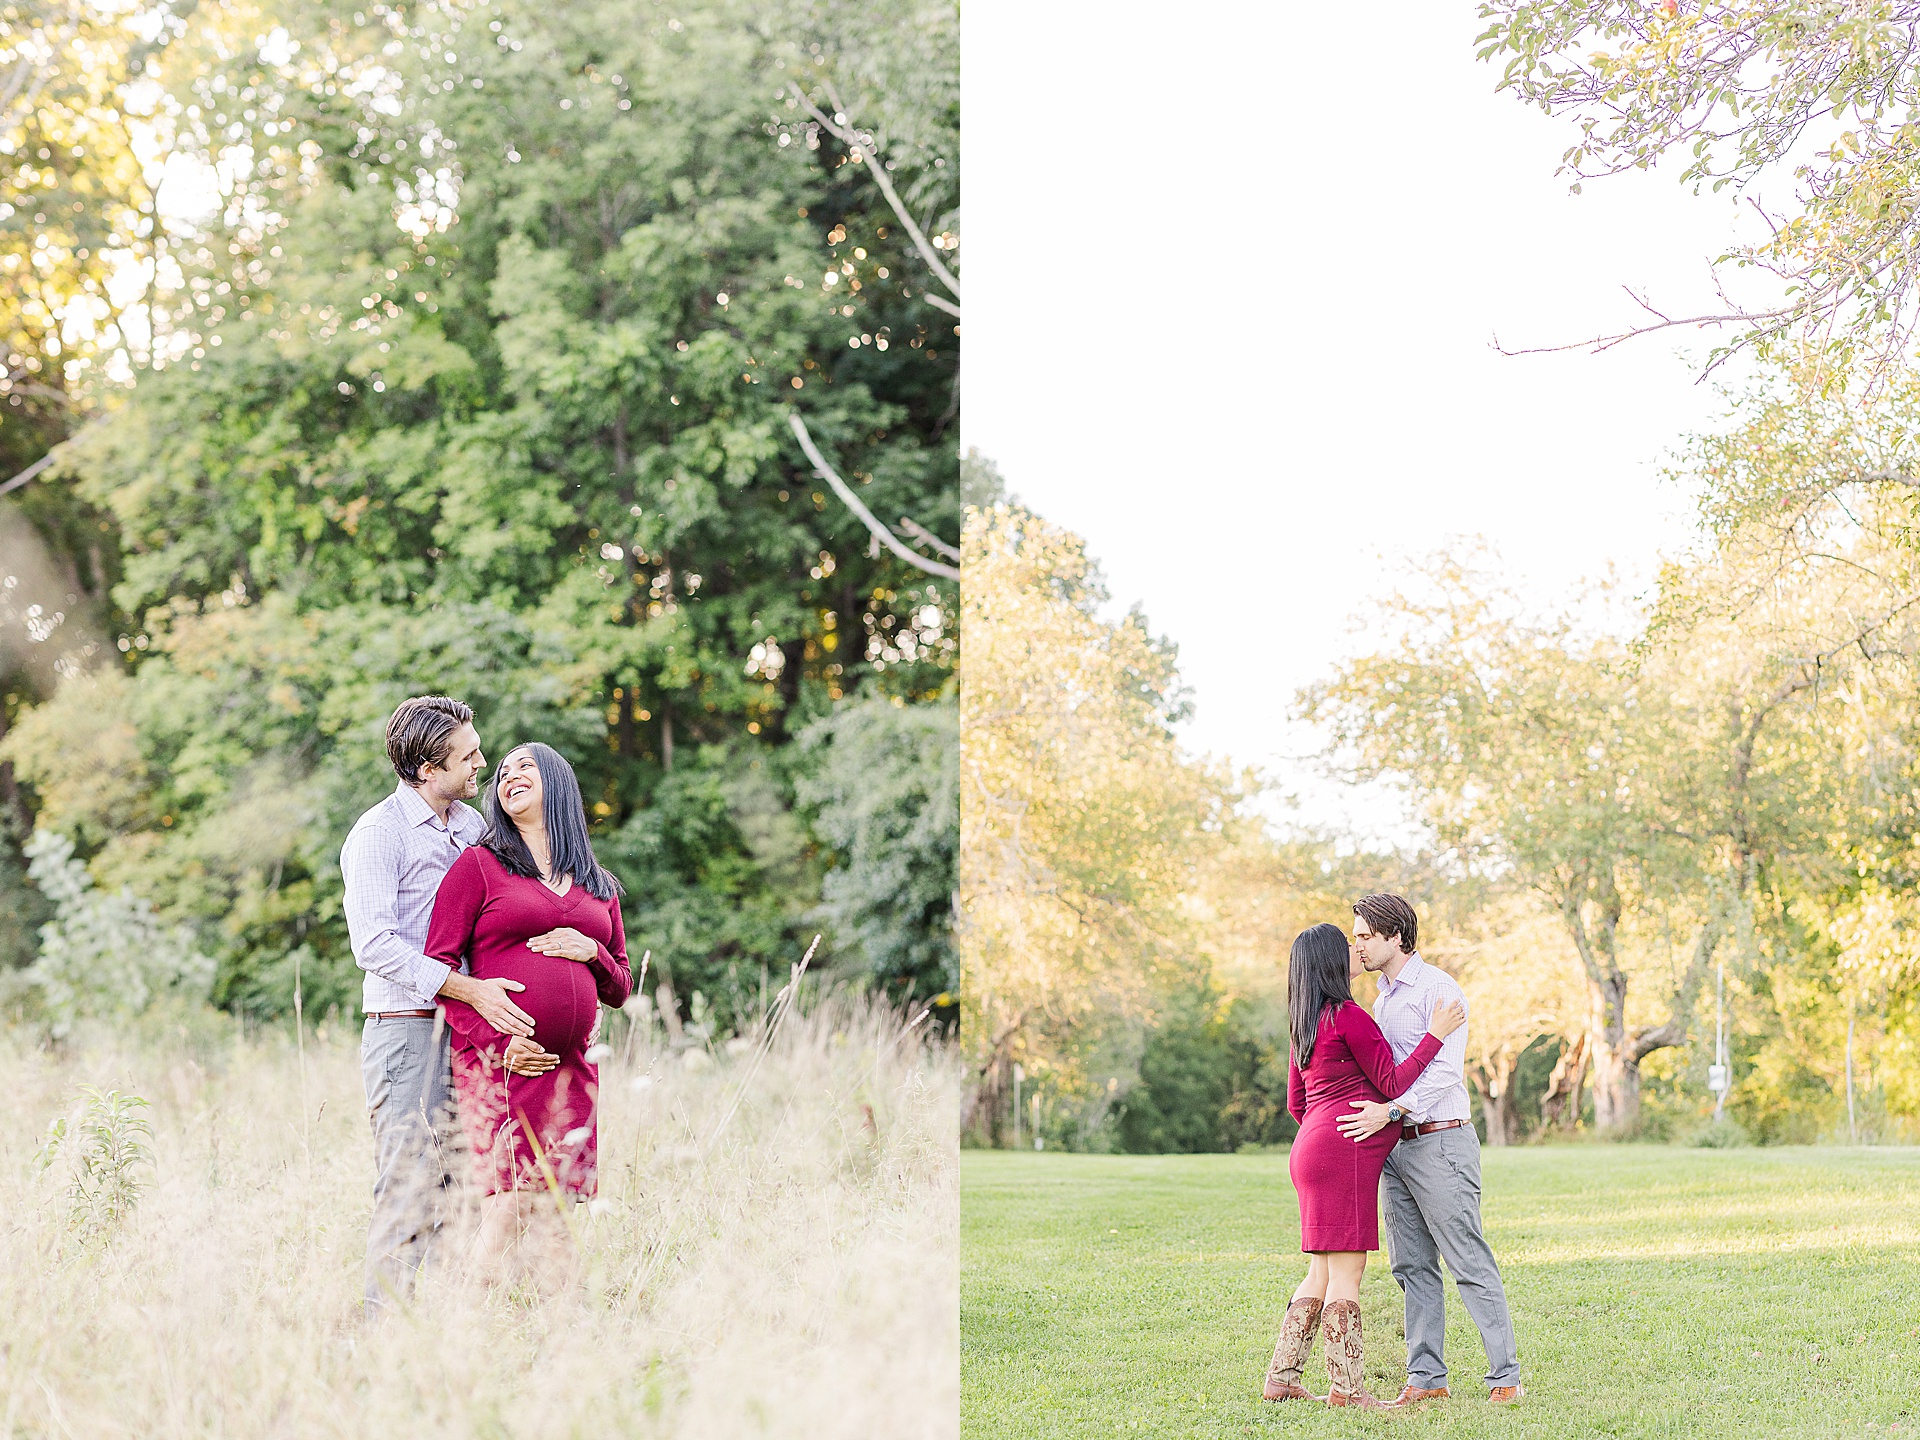 couple embraces during Maternity Photo Session with Sara Sniderman Photography at Head Farm in Wayland Massachusetts